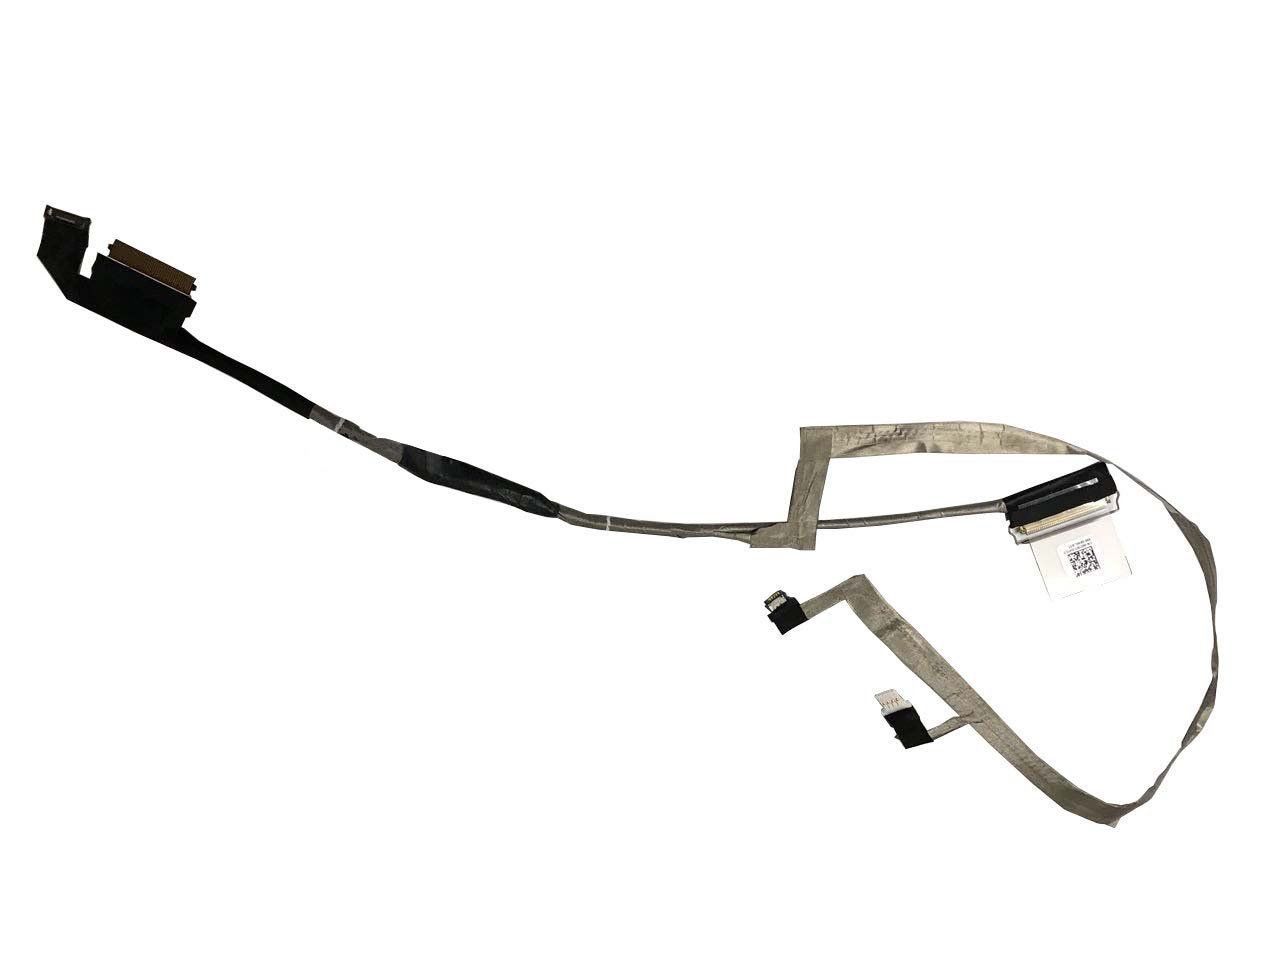 New Dell Inspiron 5000 5559 0401NT 401NT AAL25 DC02002C900 Touch LED LCD Screen LVDS VIDEO Cable